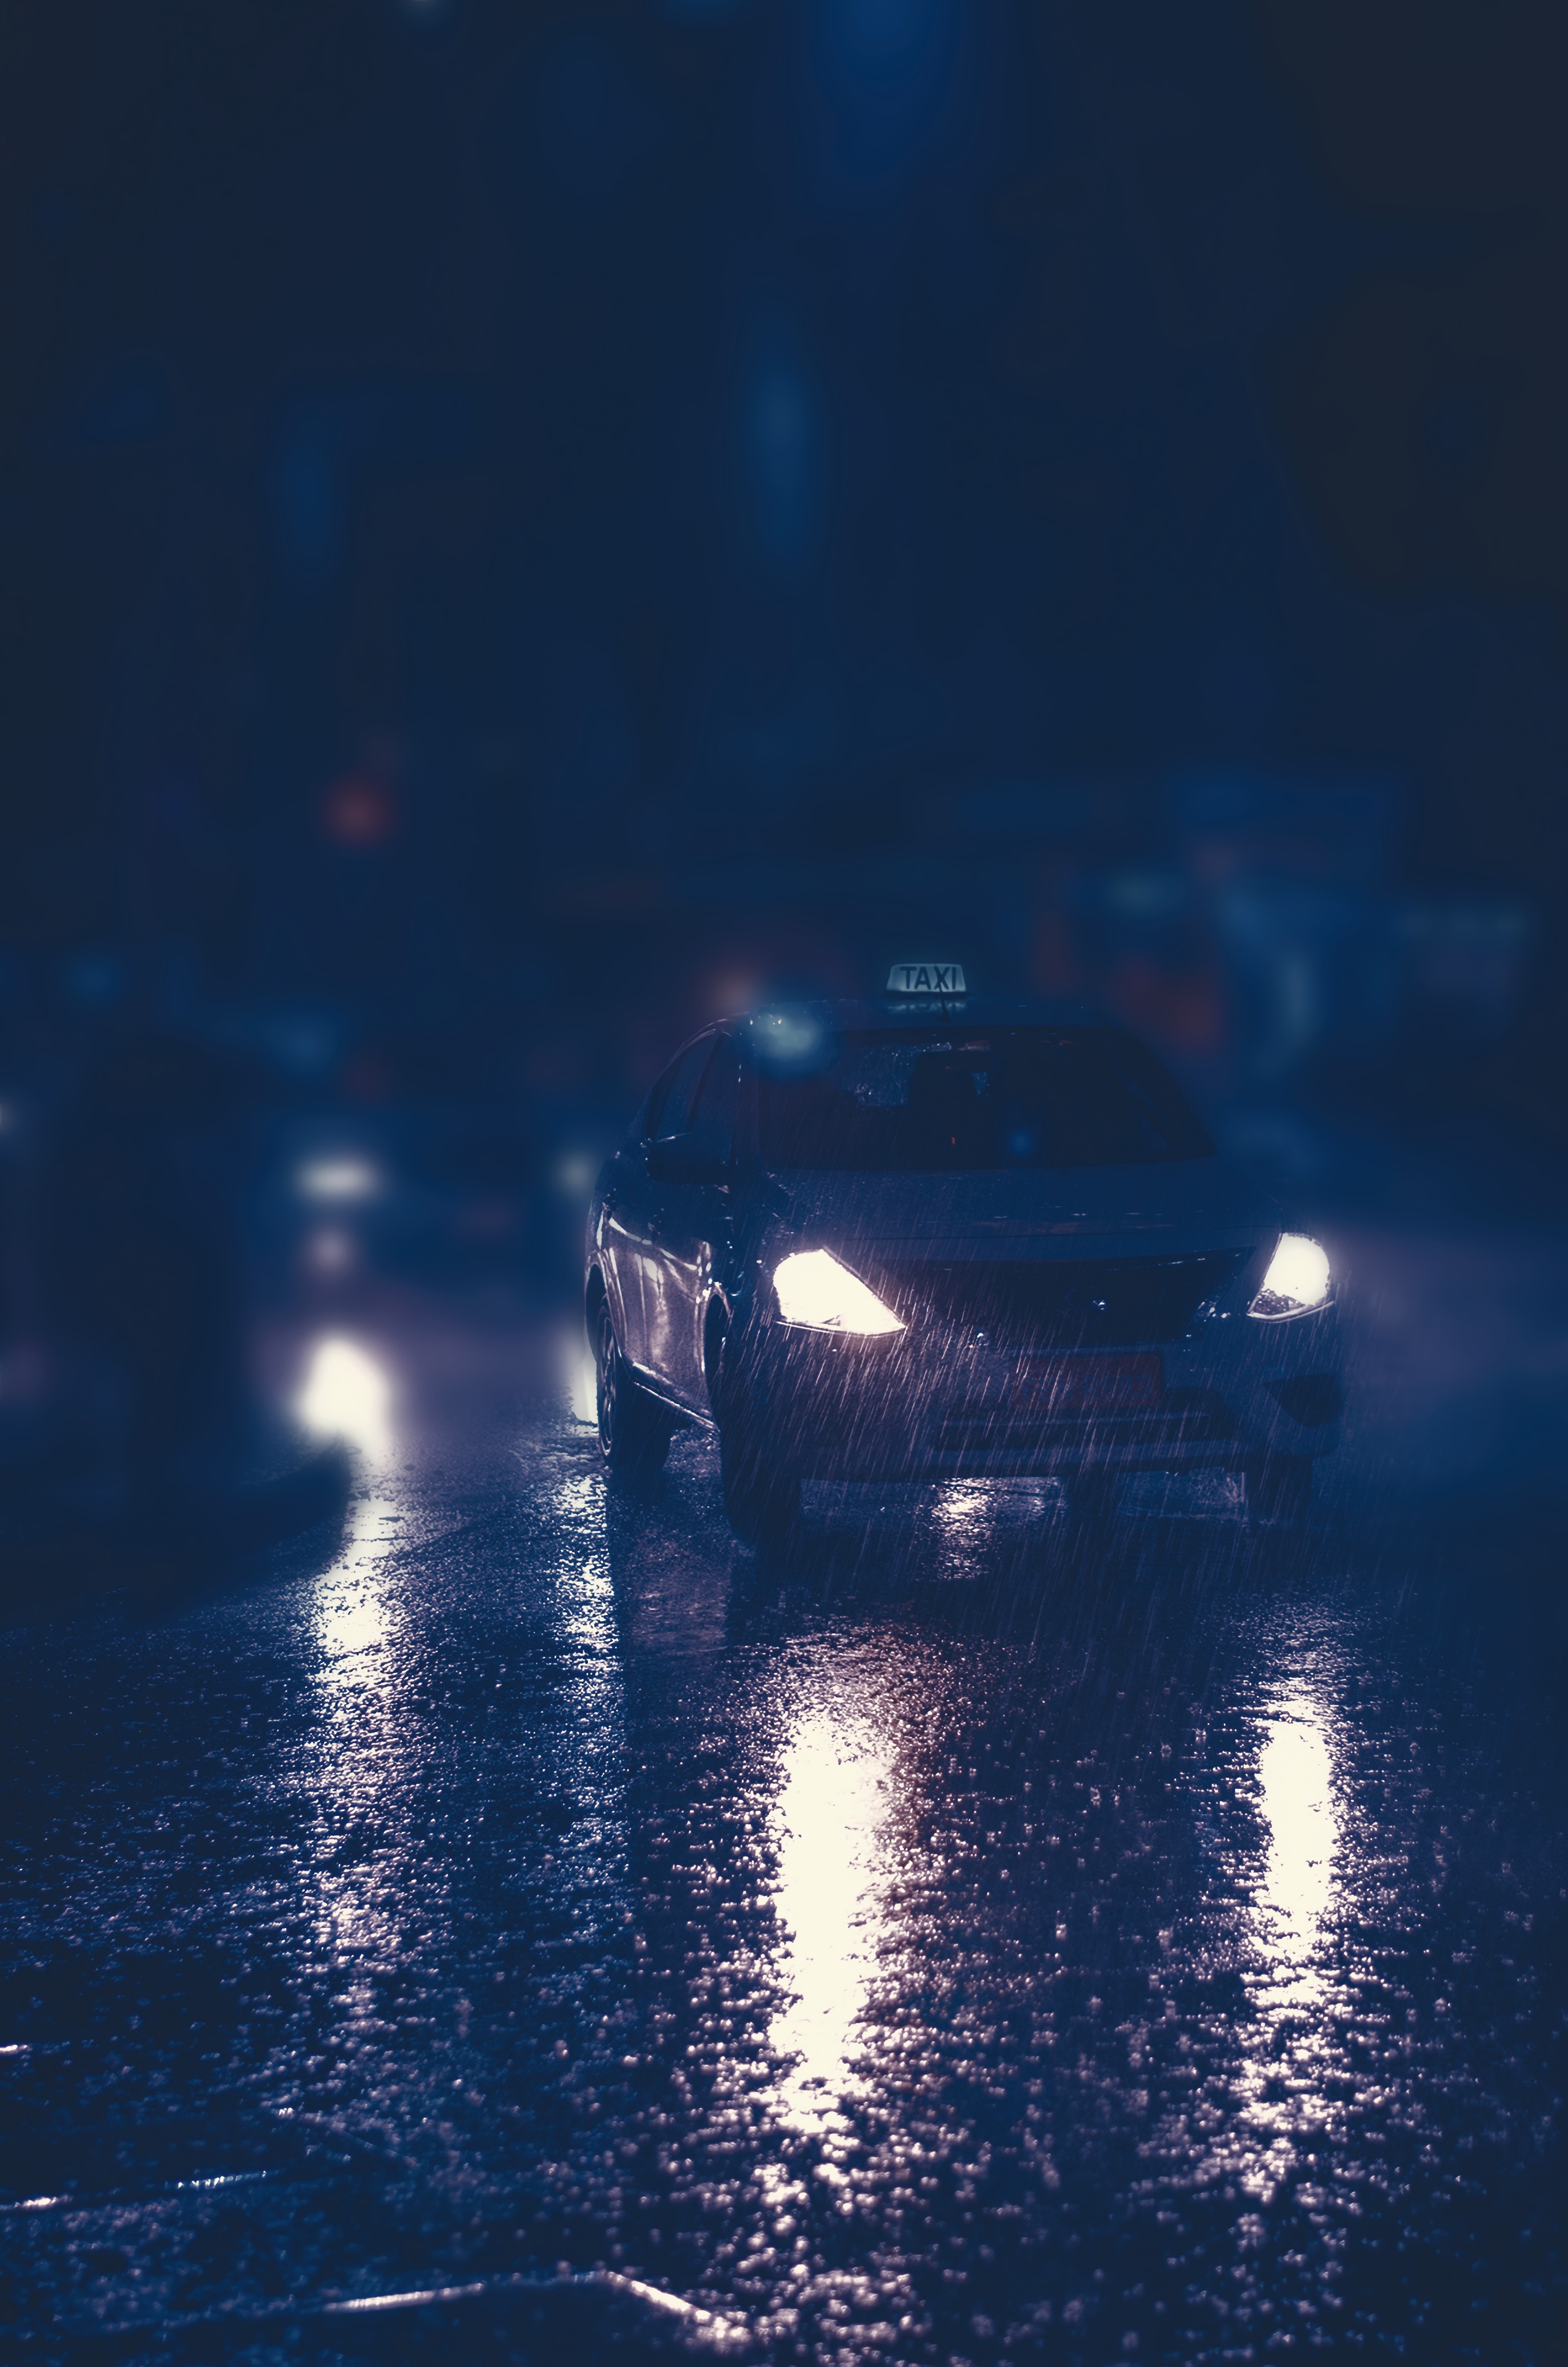 154910 download wallpaper headlights, rain, night, taxi, lights, dark, car, street screensavers and pictures for free